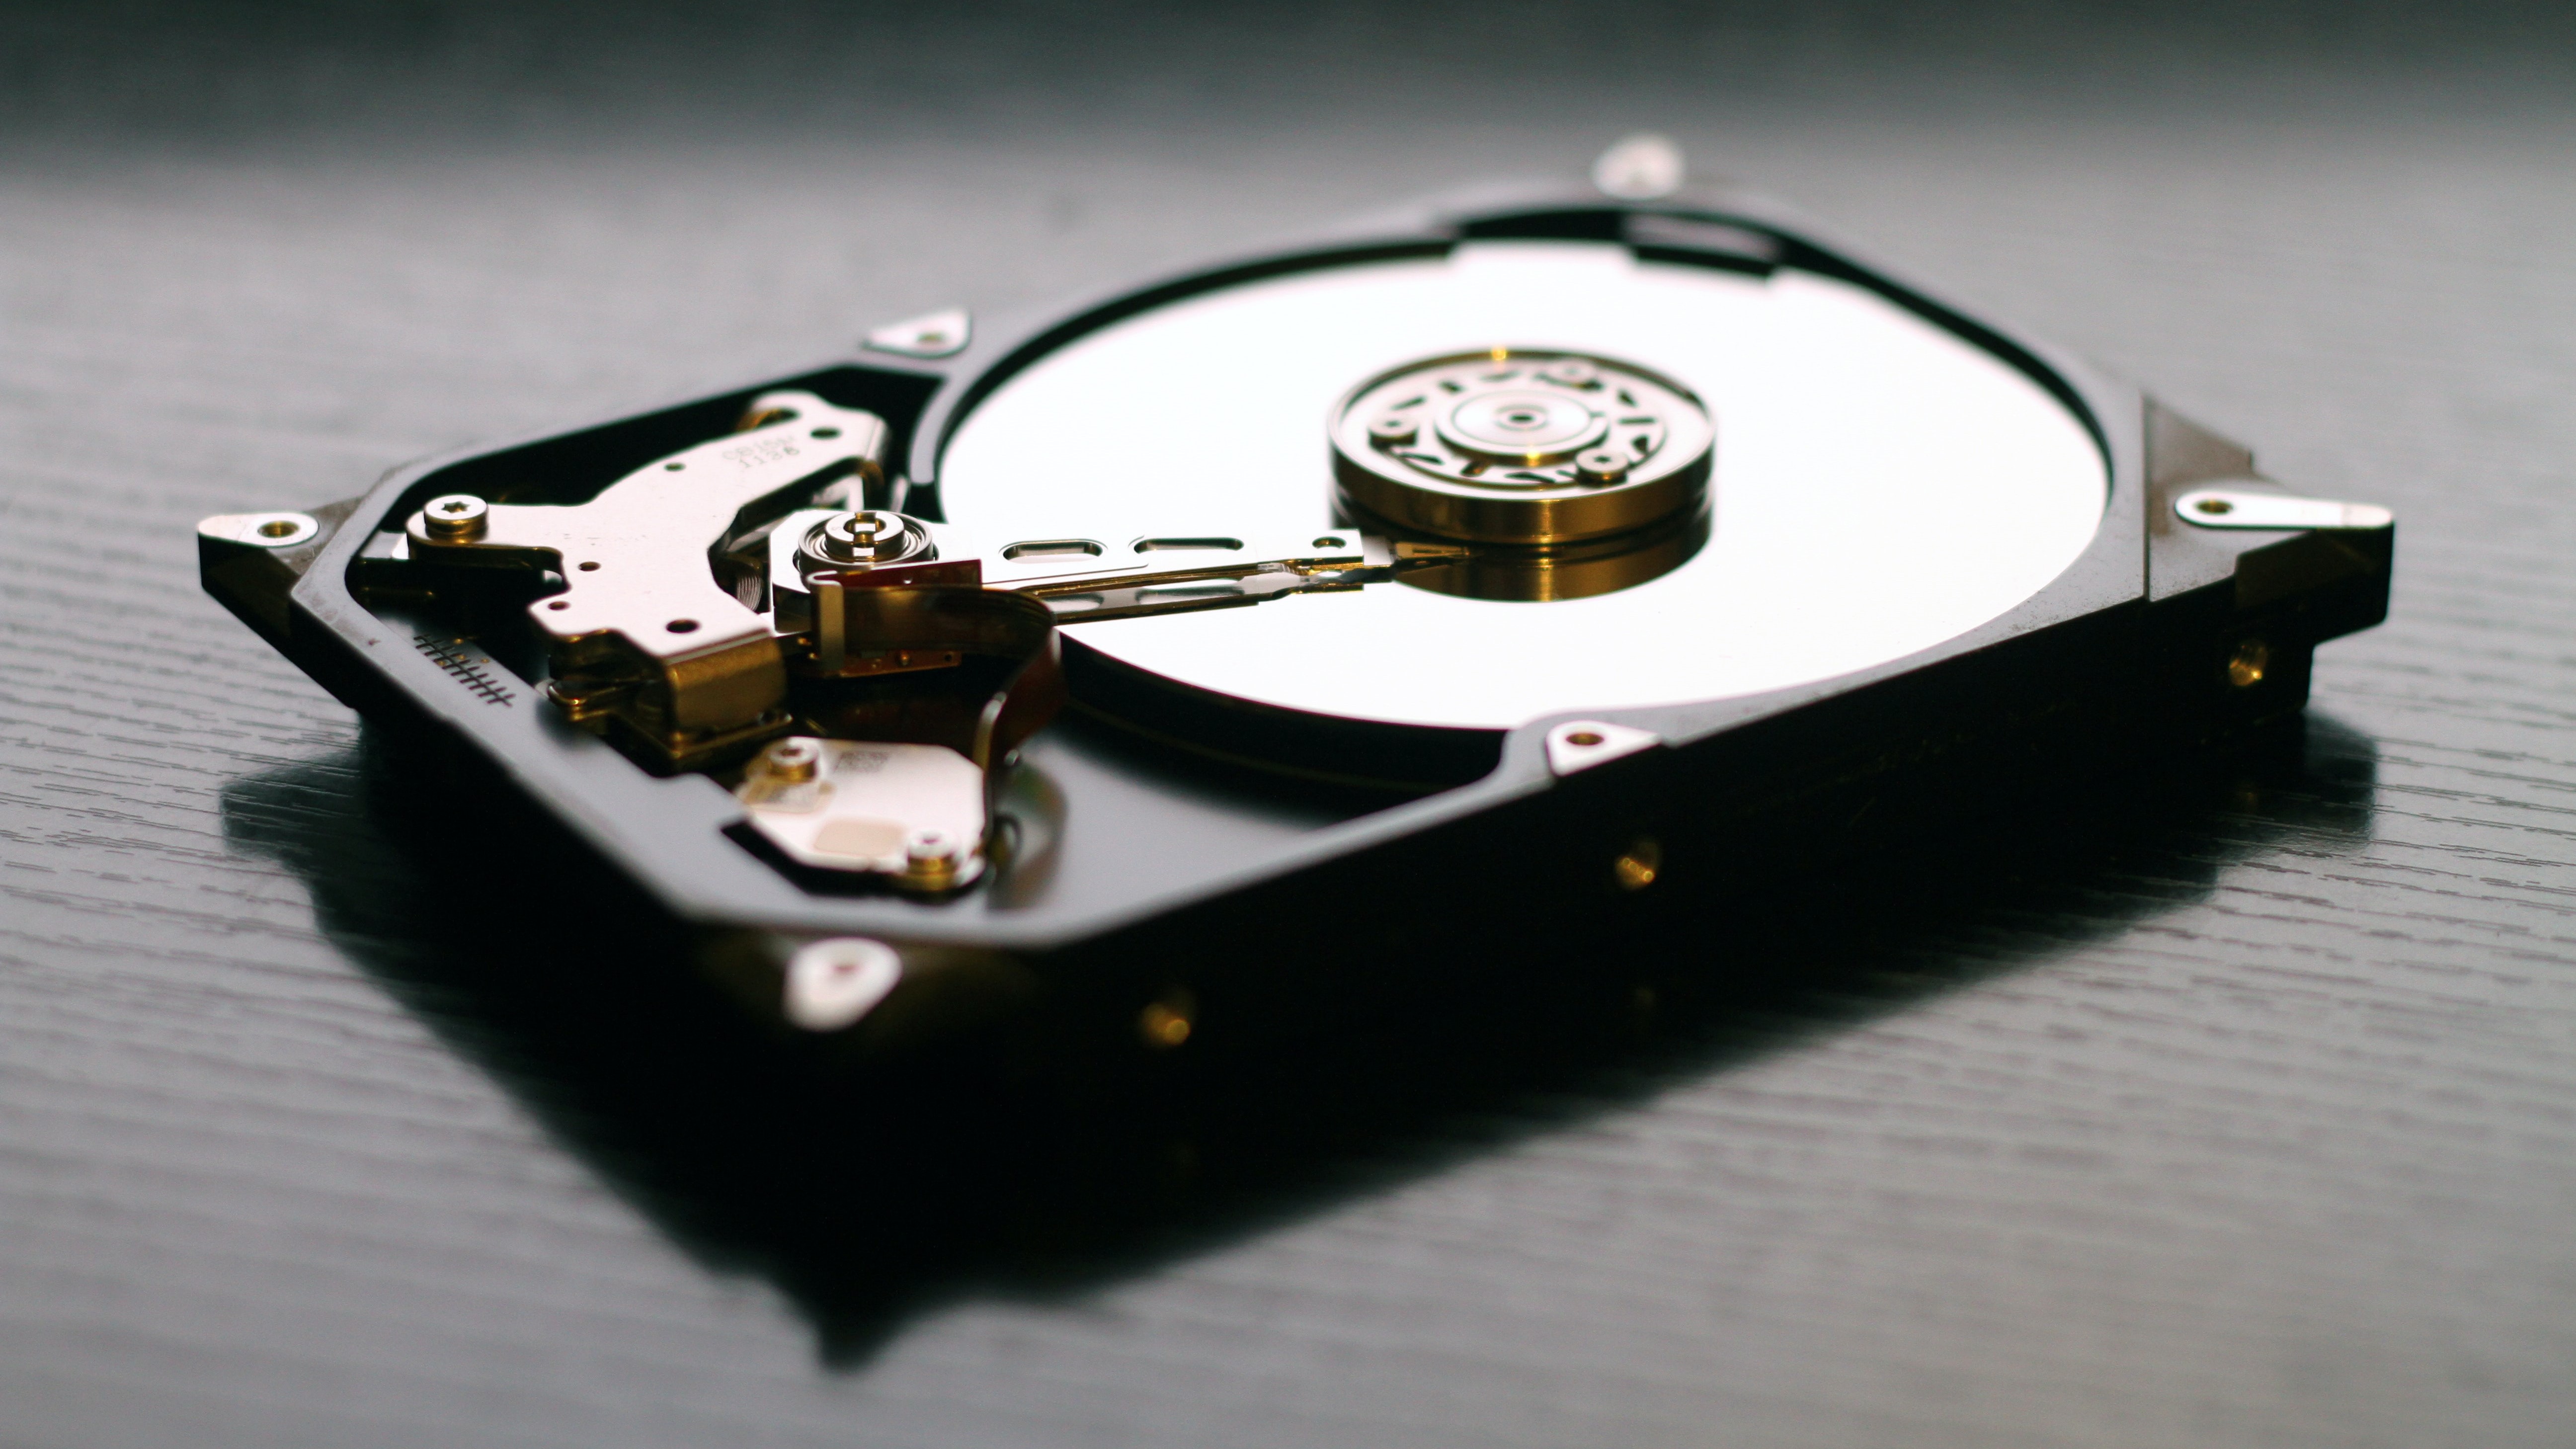 How to check your hard drive’s health